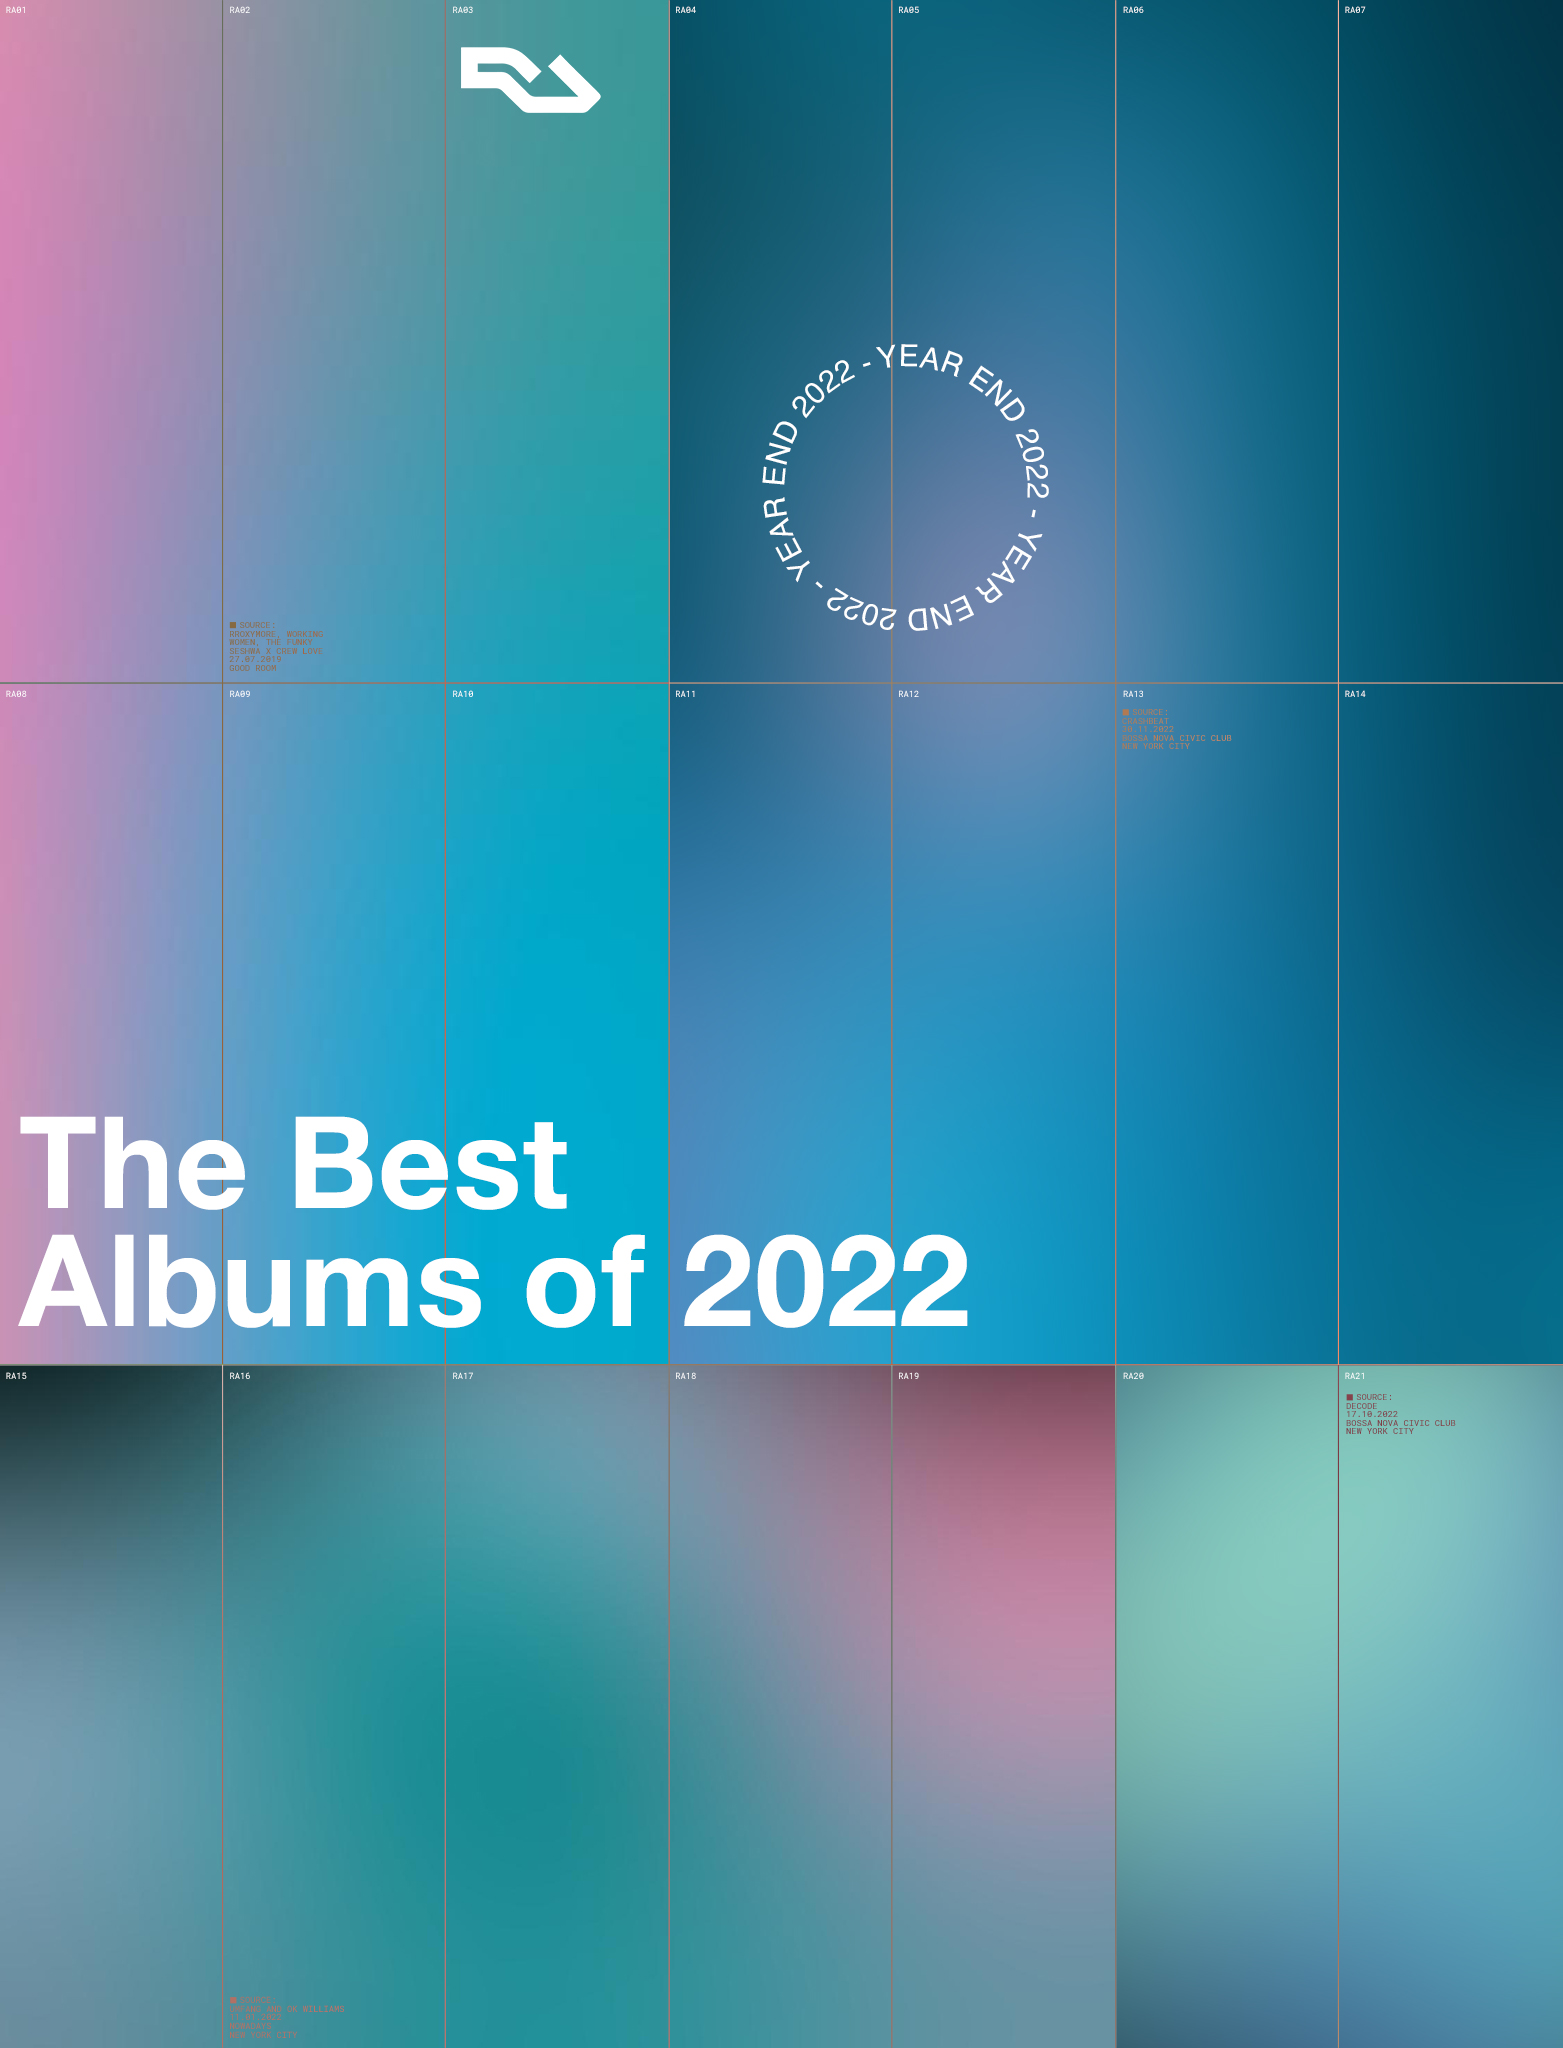 The 10 best local albums of 2022, according to our critics